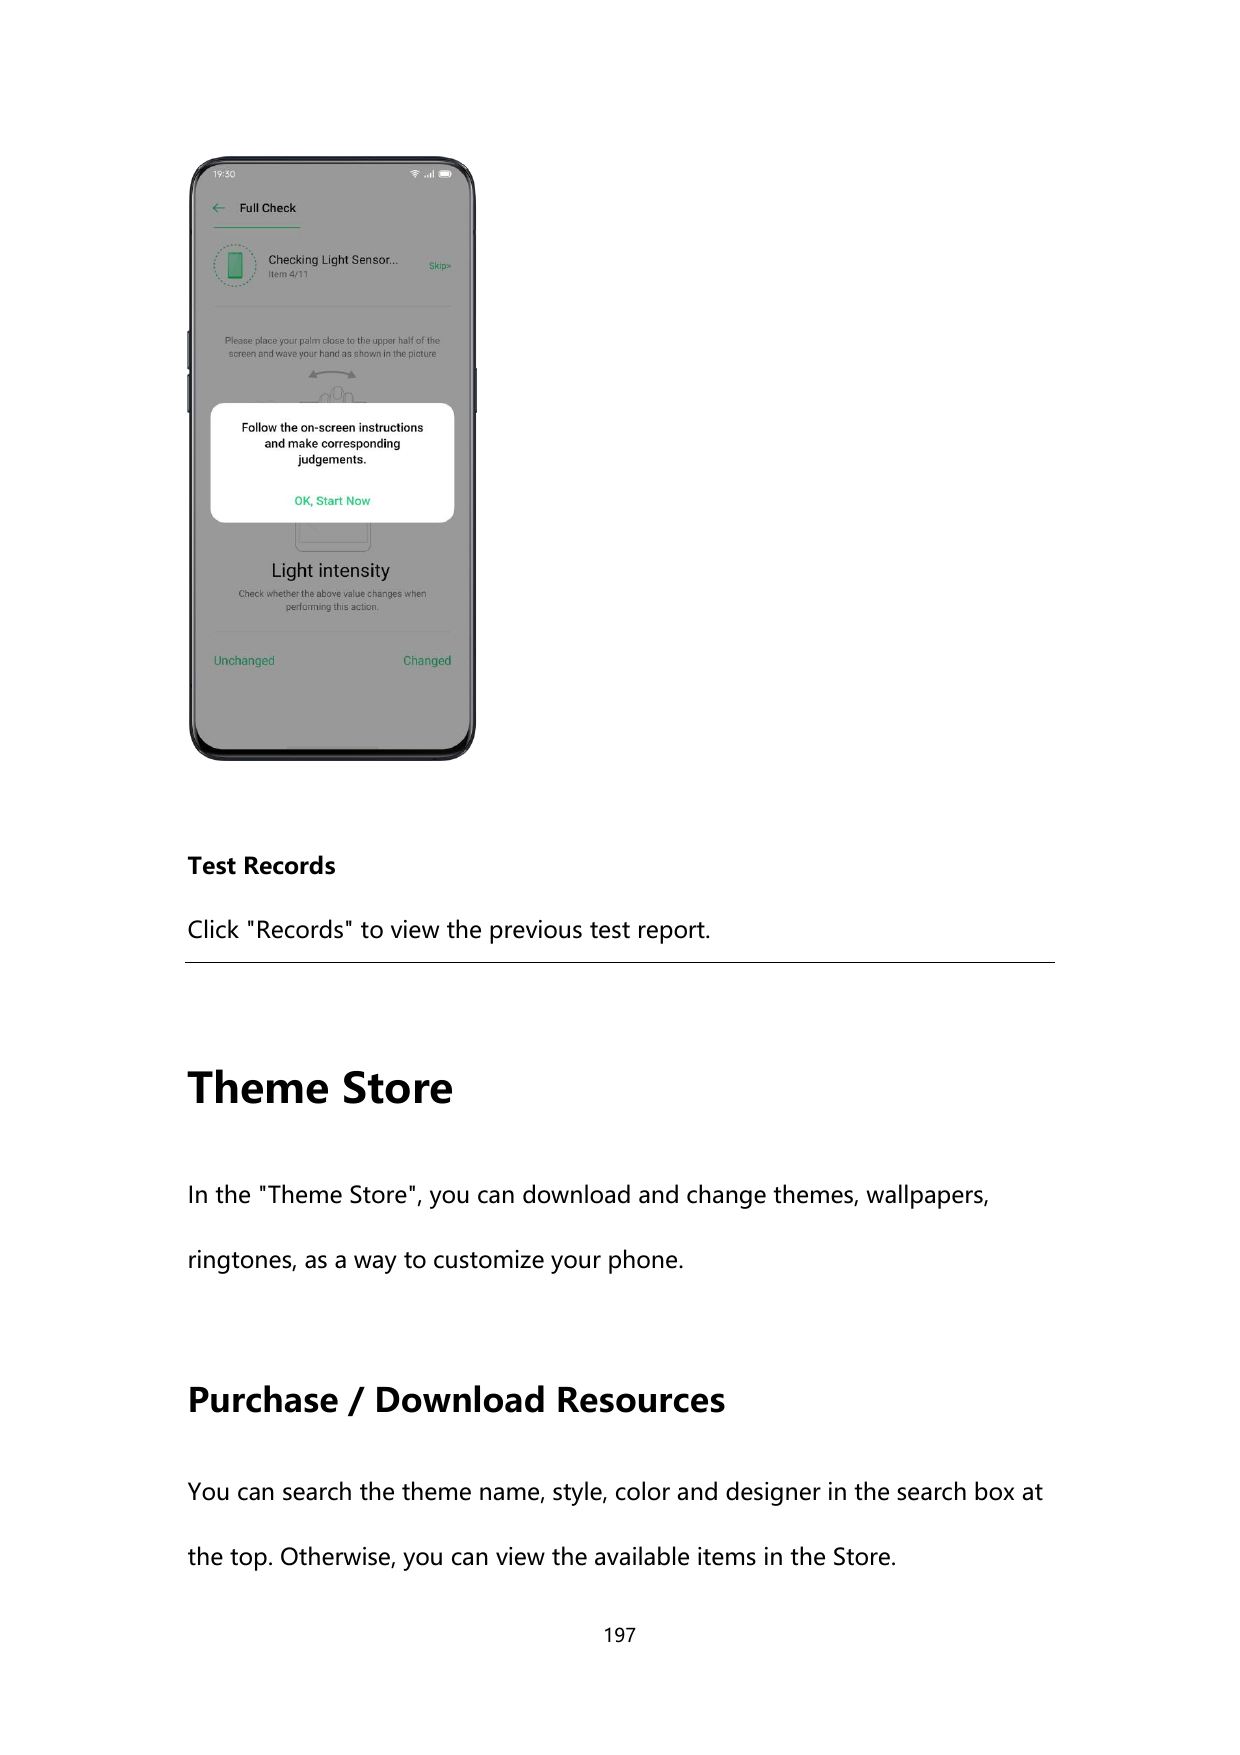 Test RecordsClick "Records" to view the previous test report.Theme StoreIn the "Theme Store", you can download and change themes